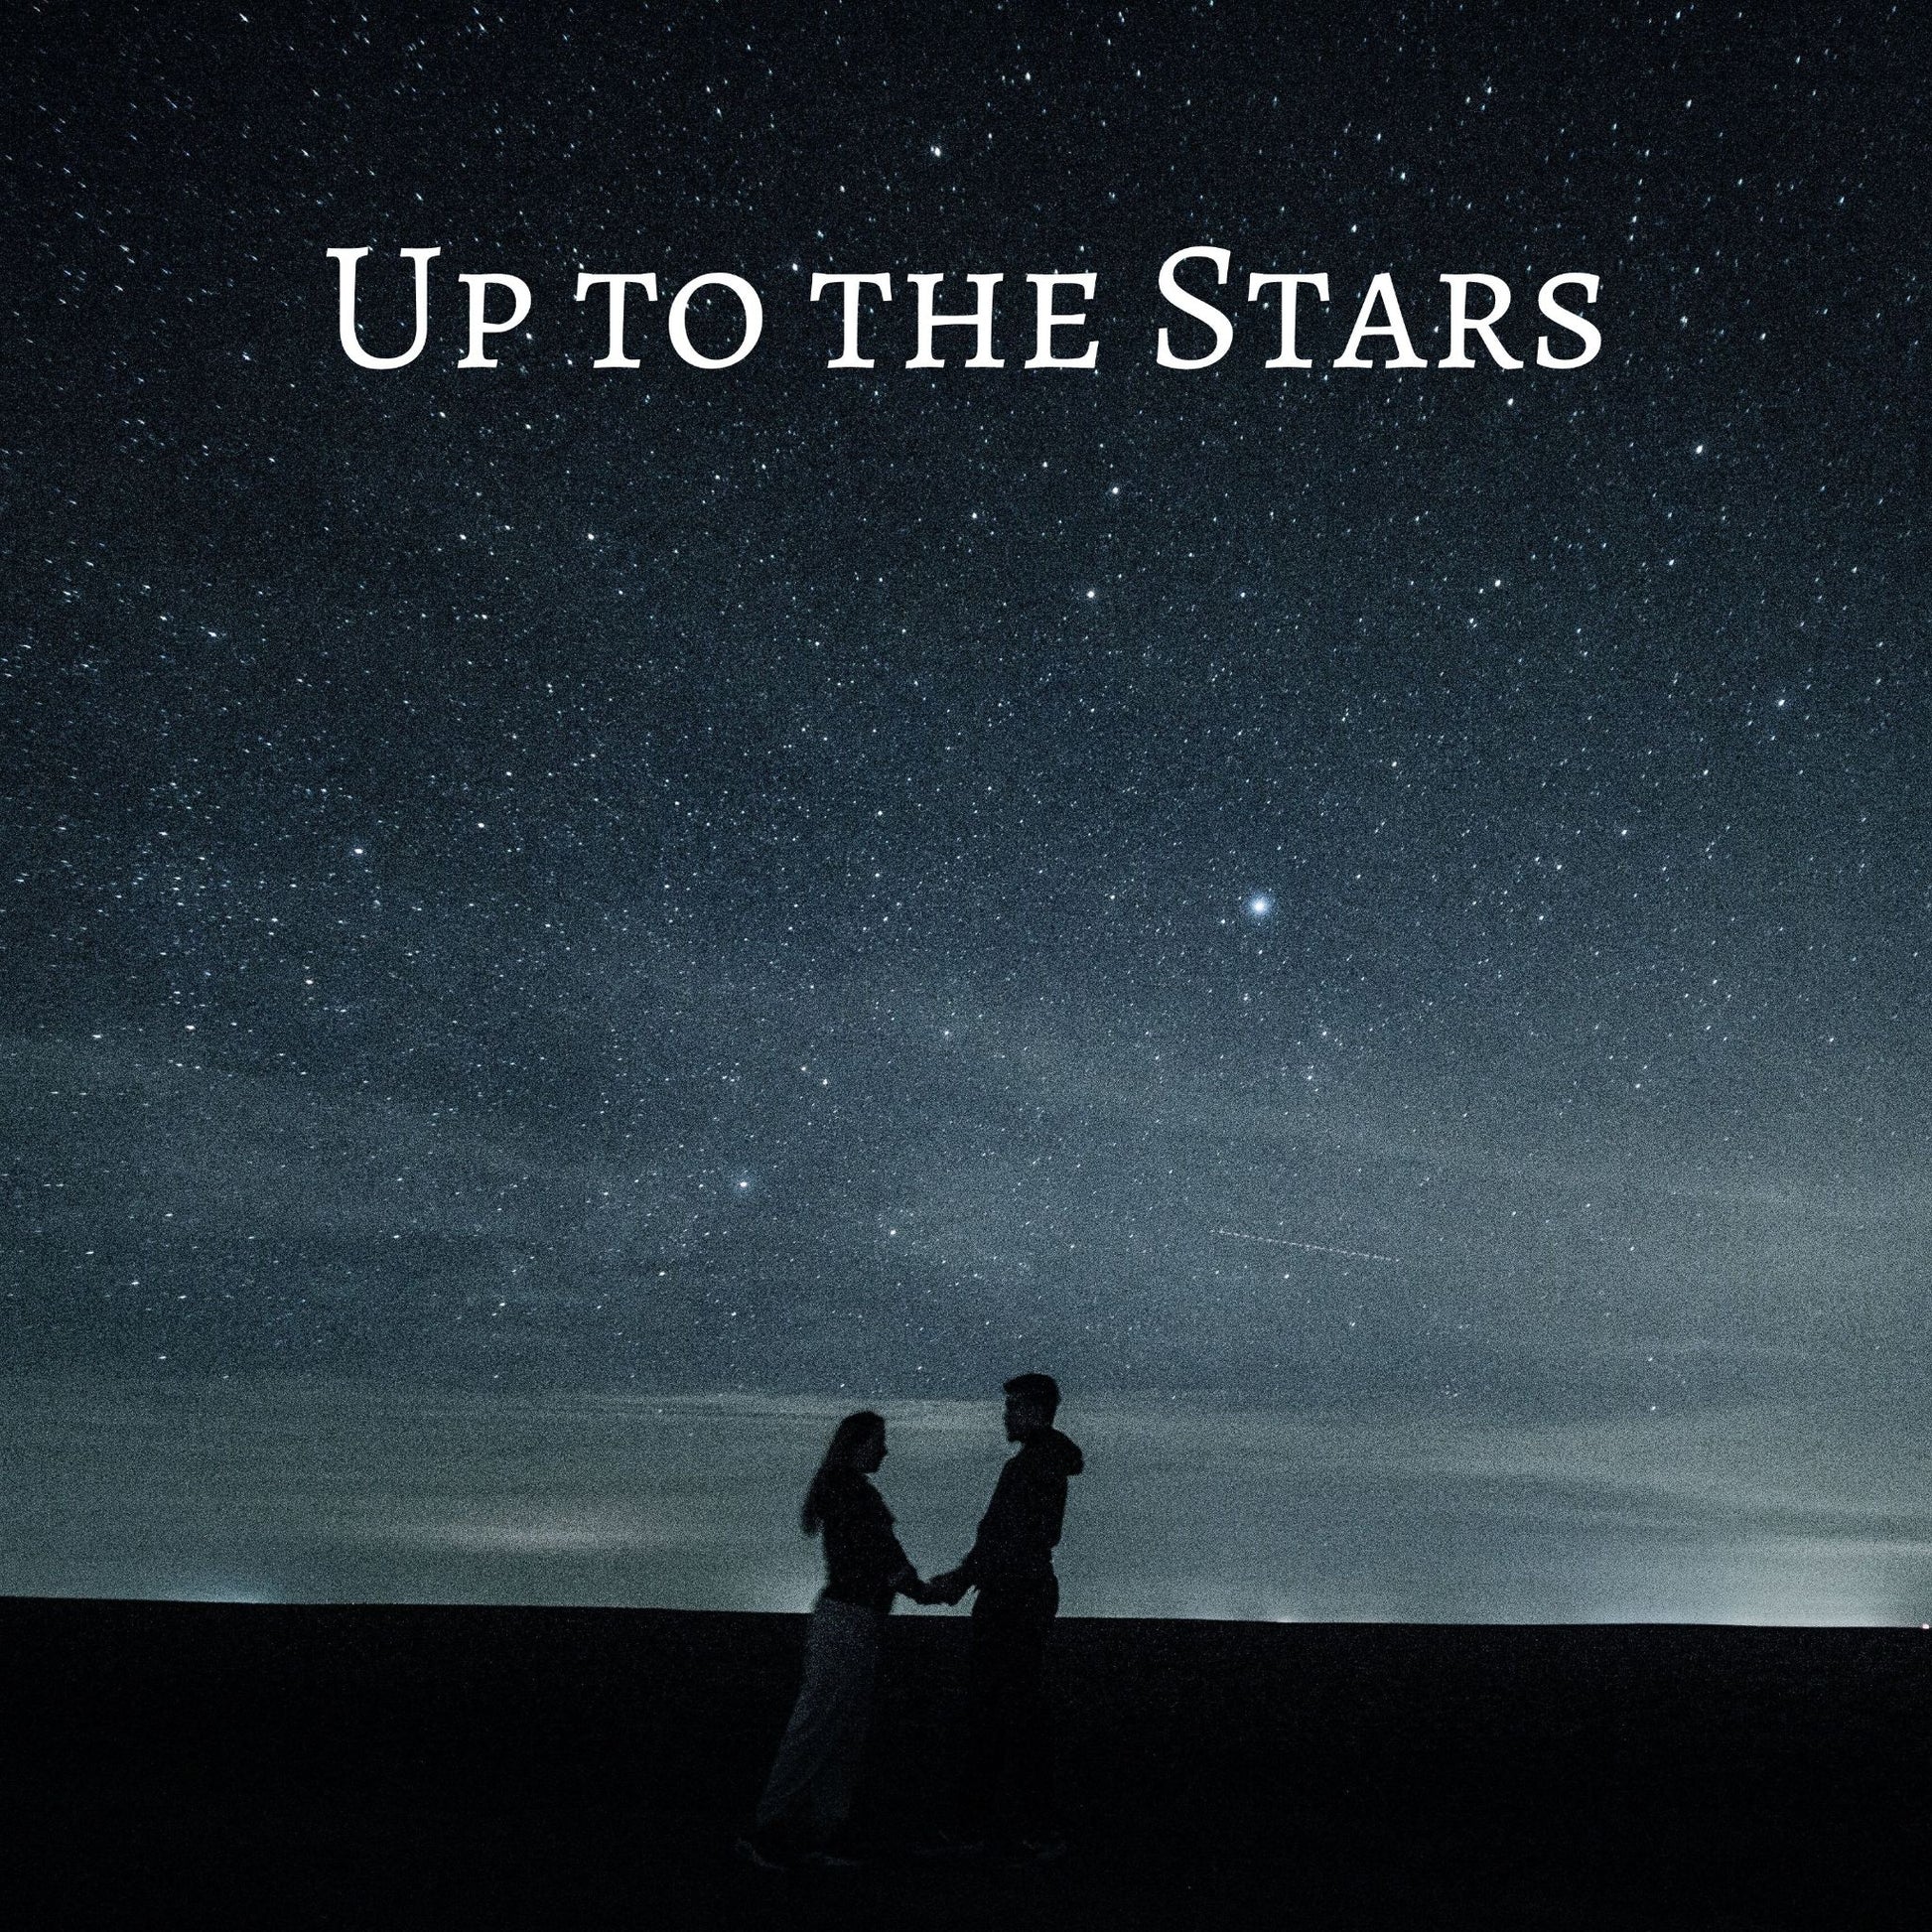 CD Cover of song Up to the Stars